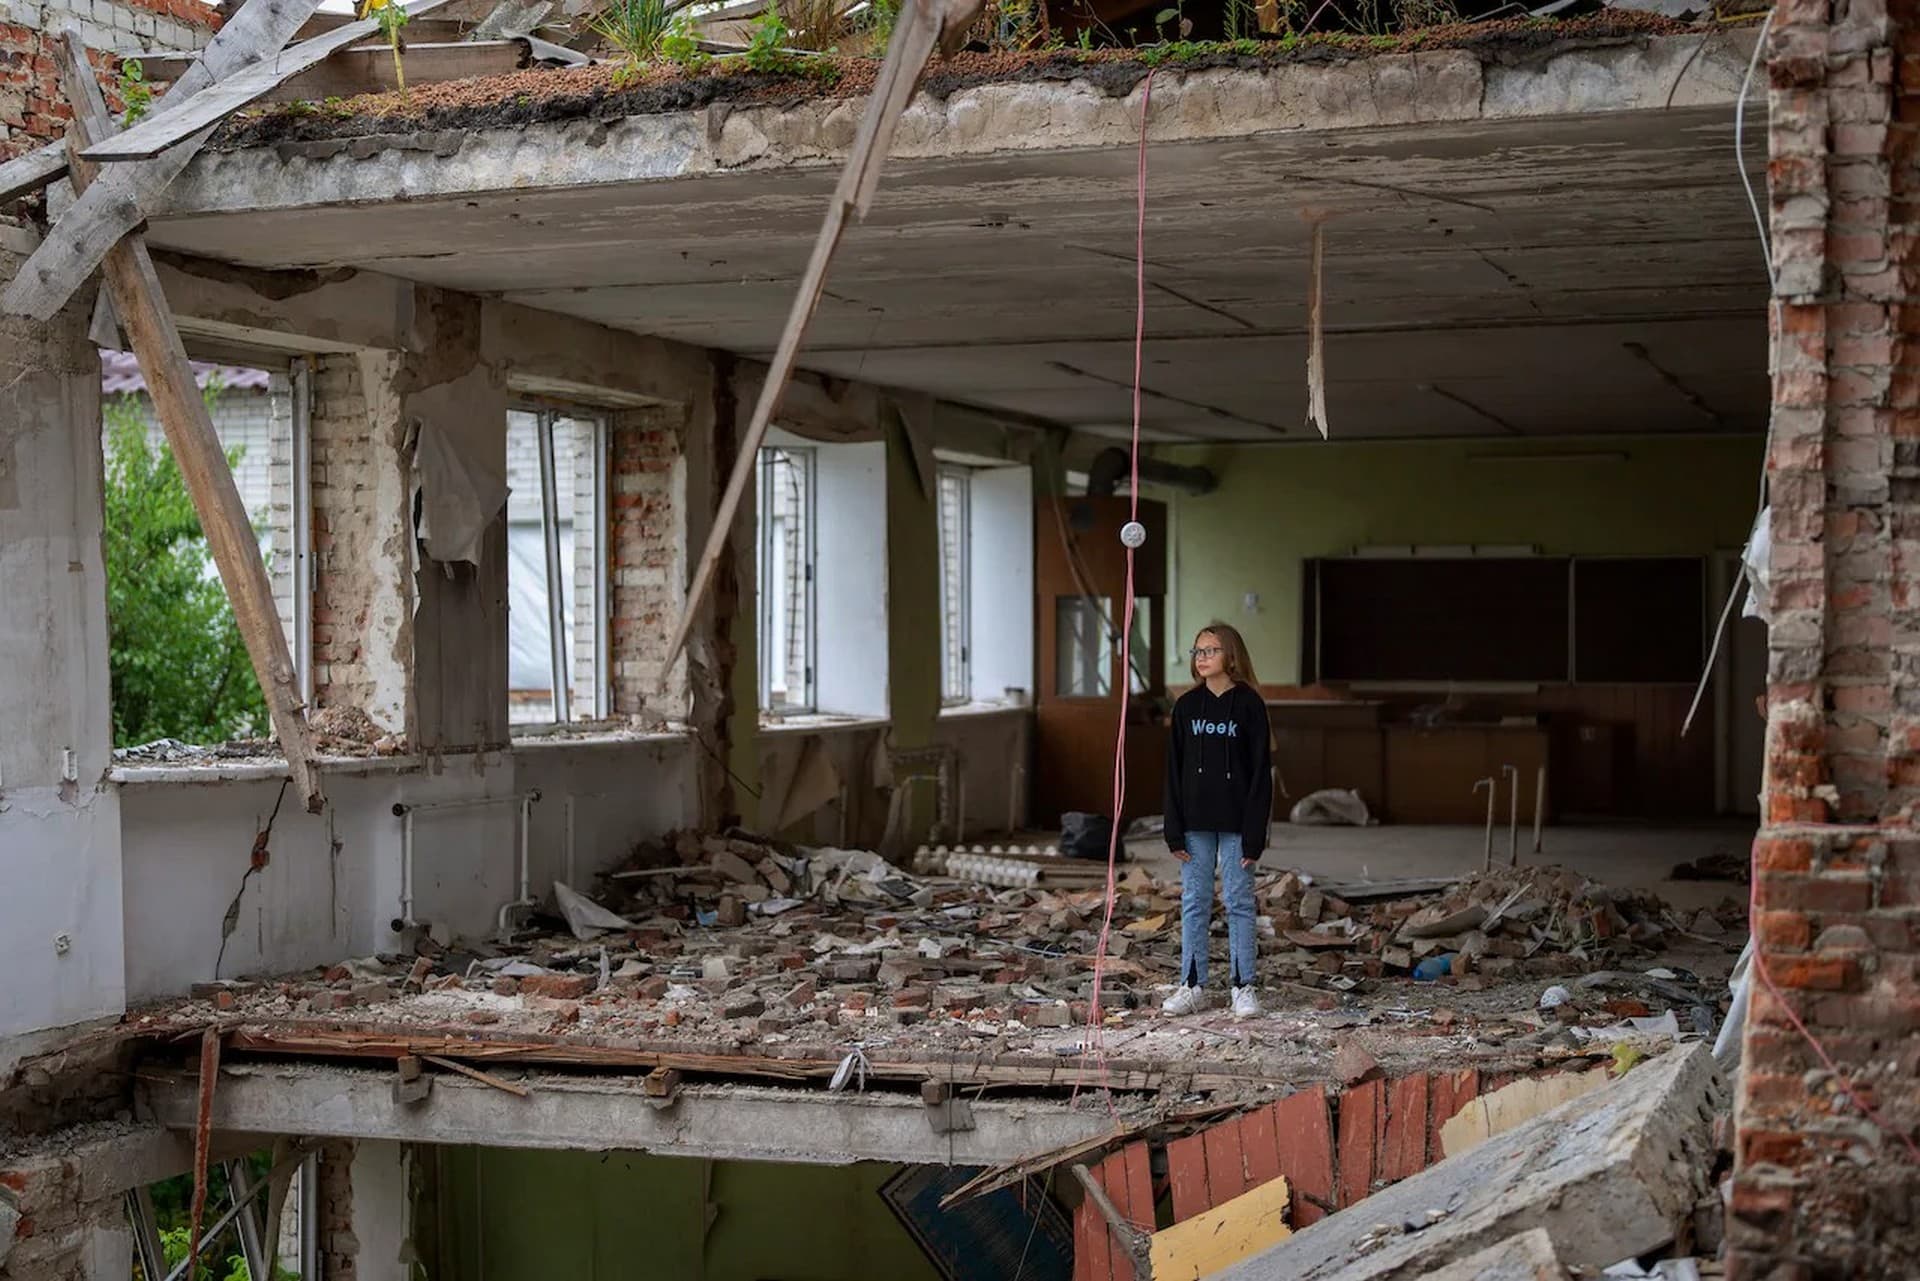 Anna Skiban stands in the rubble of her former classroom, in the same position where her desk sat before the Mykhailo-Kotsyubynske's lyceum was bombed by Russian forces on March 4, in Chernihiv